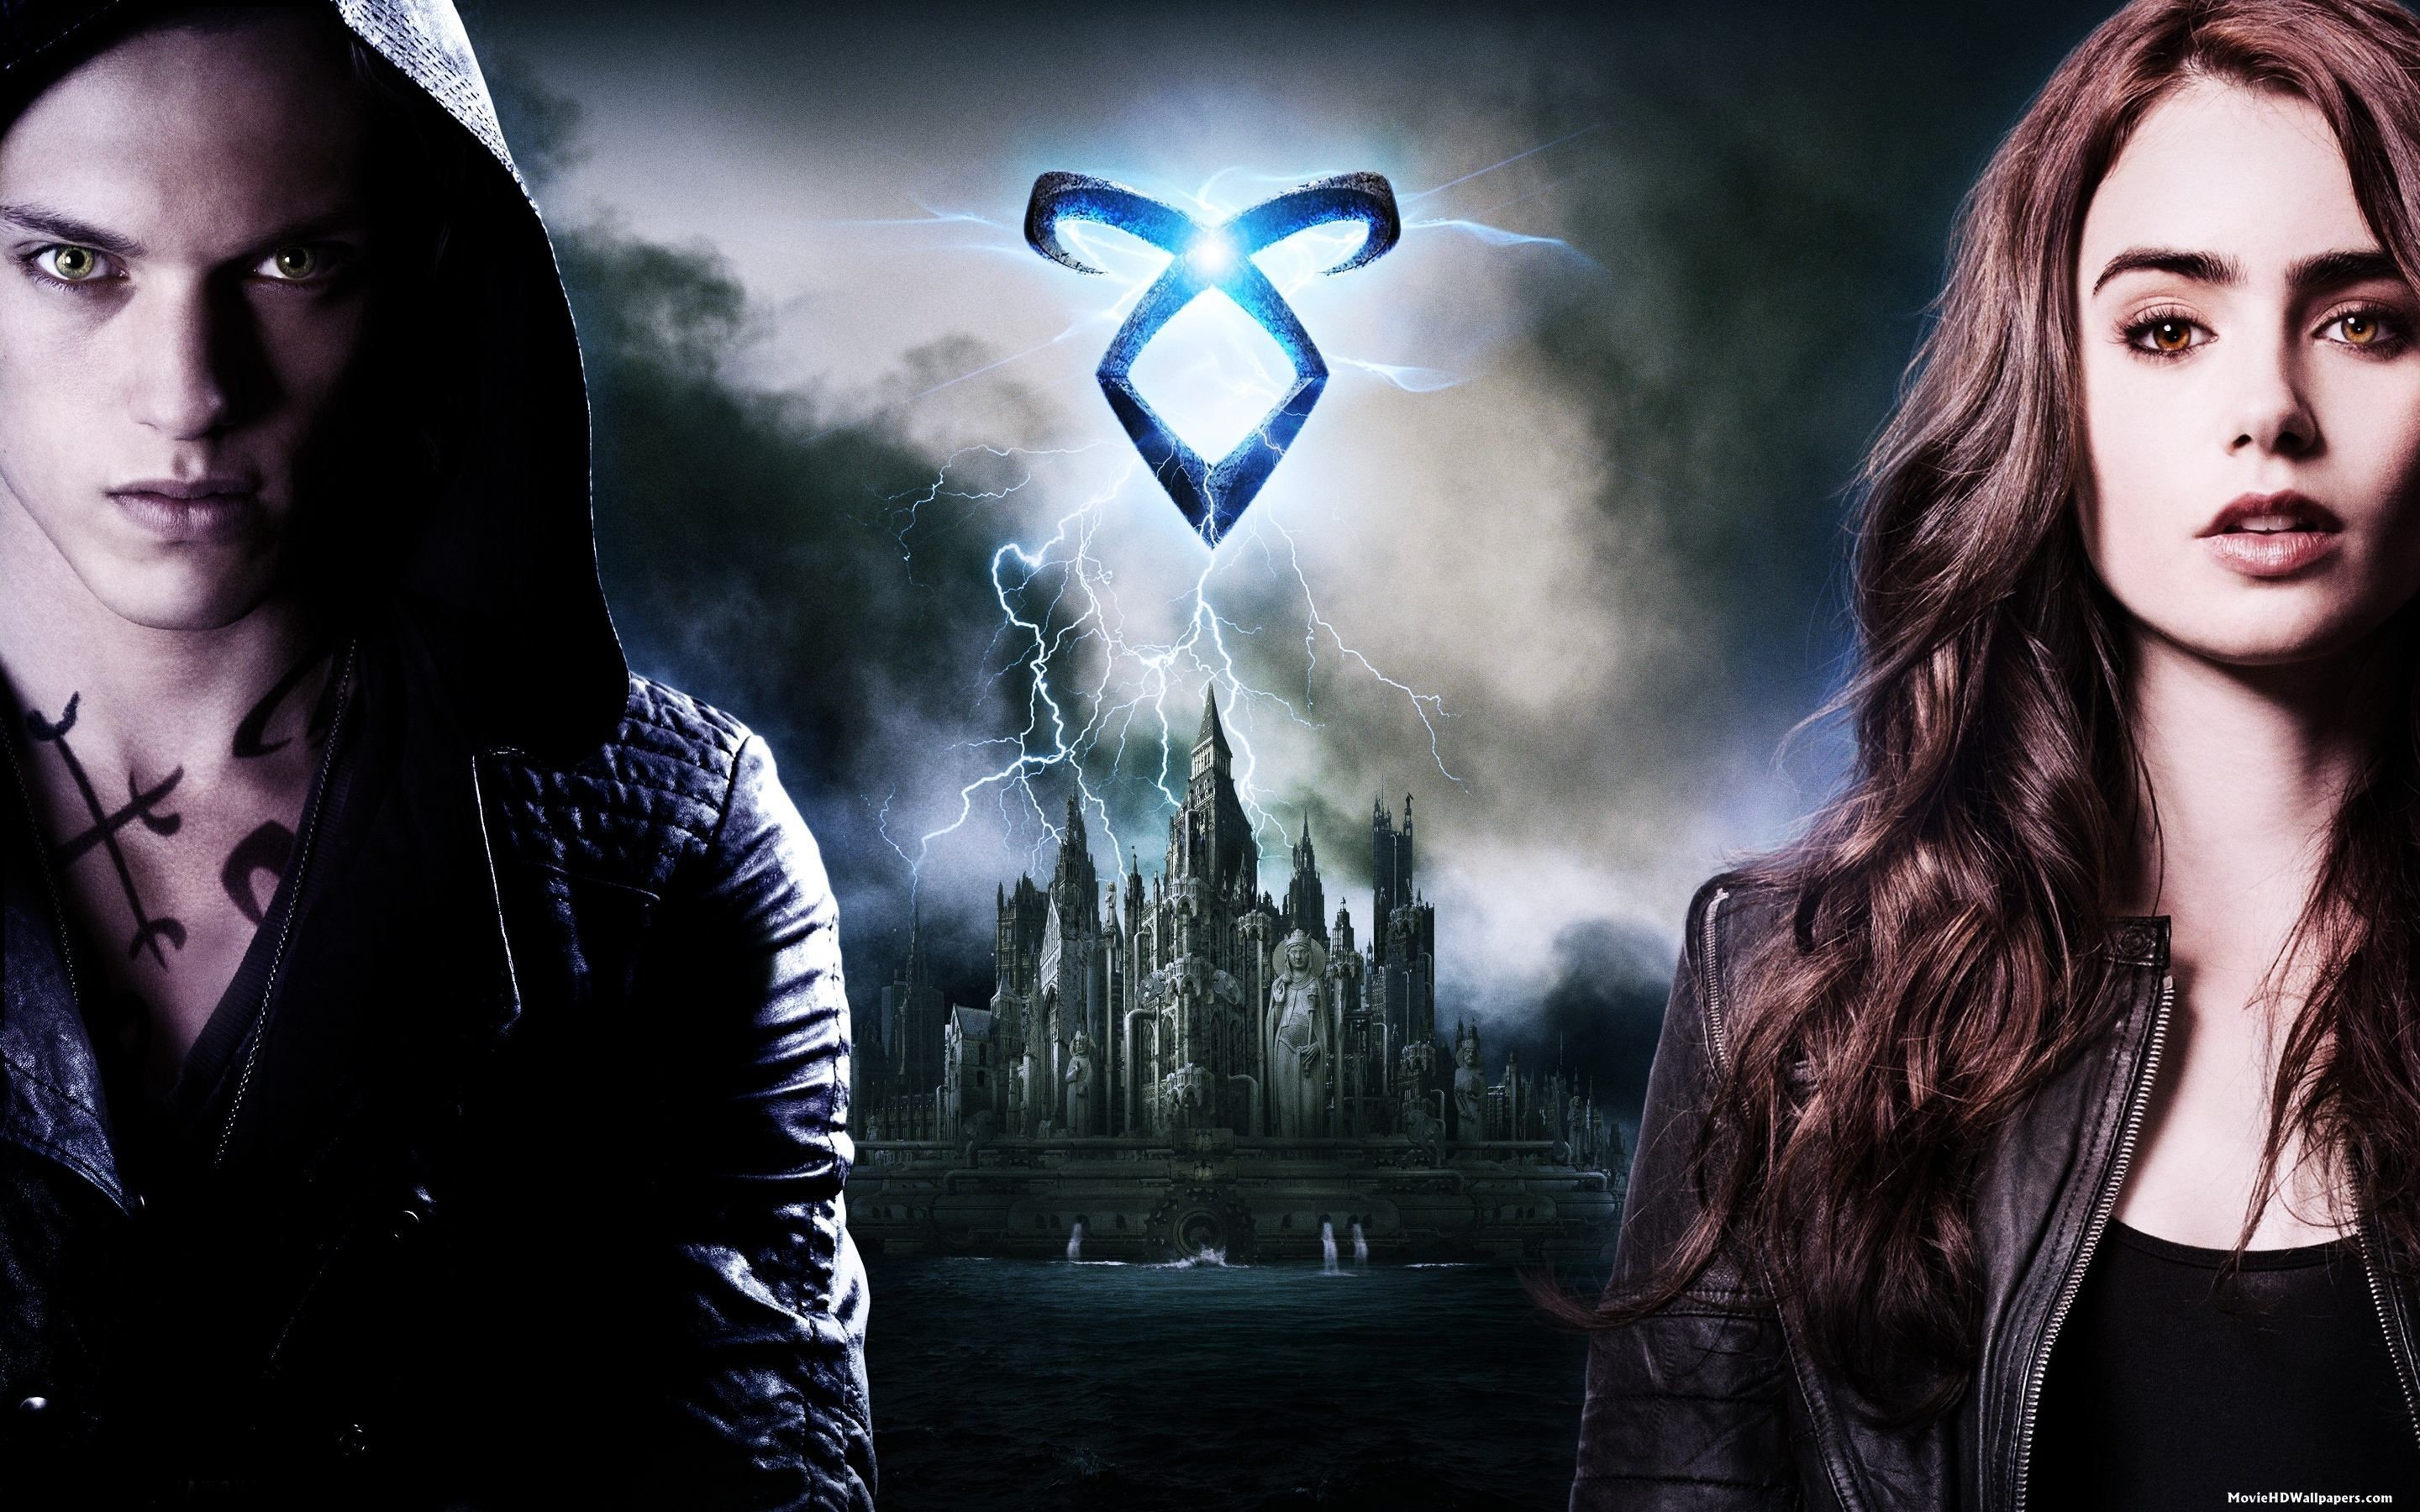 2880x1800 1920x1080 Shadowhunters Wallpaper - Original size, download now.